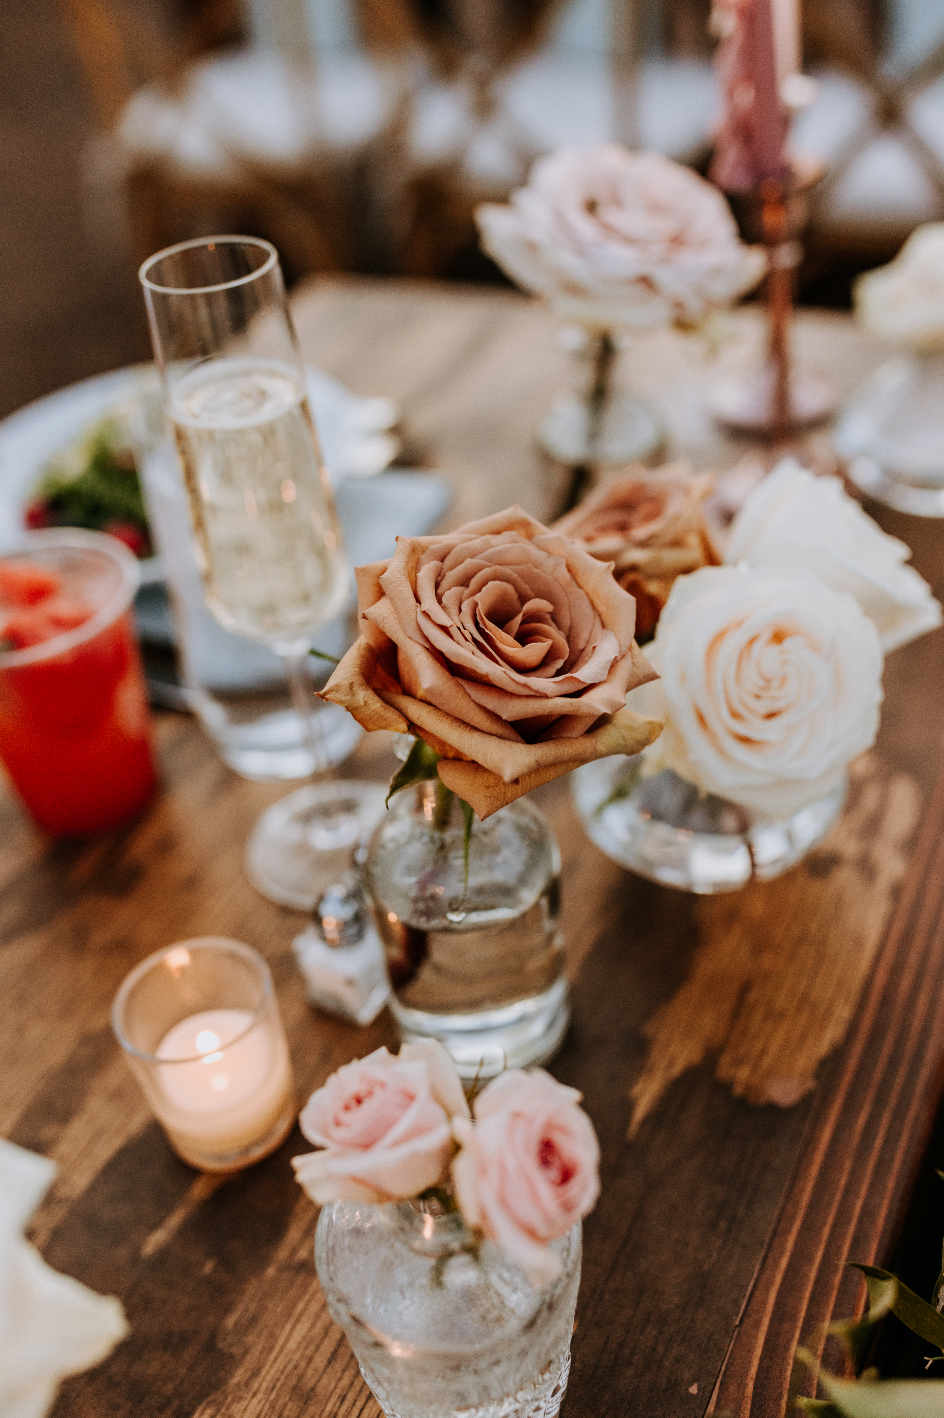 Toffee rose centerpieces